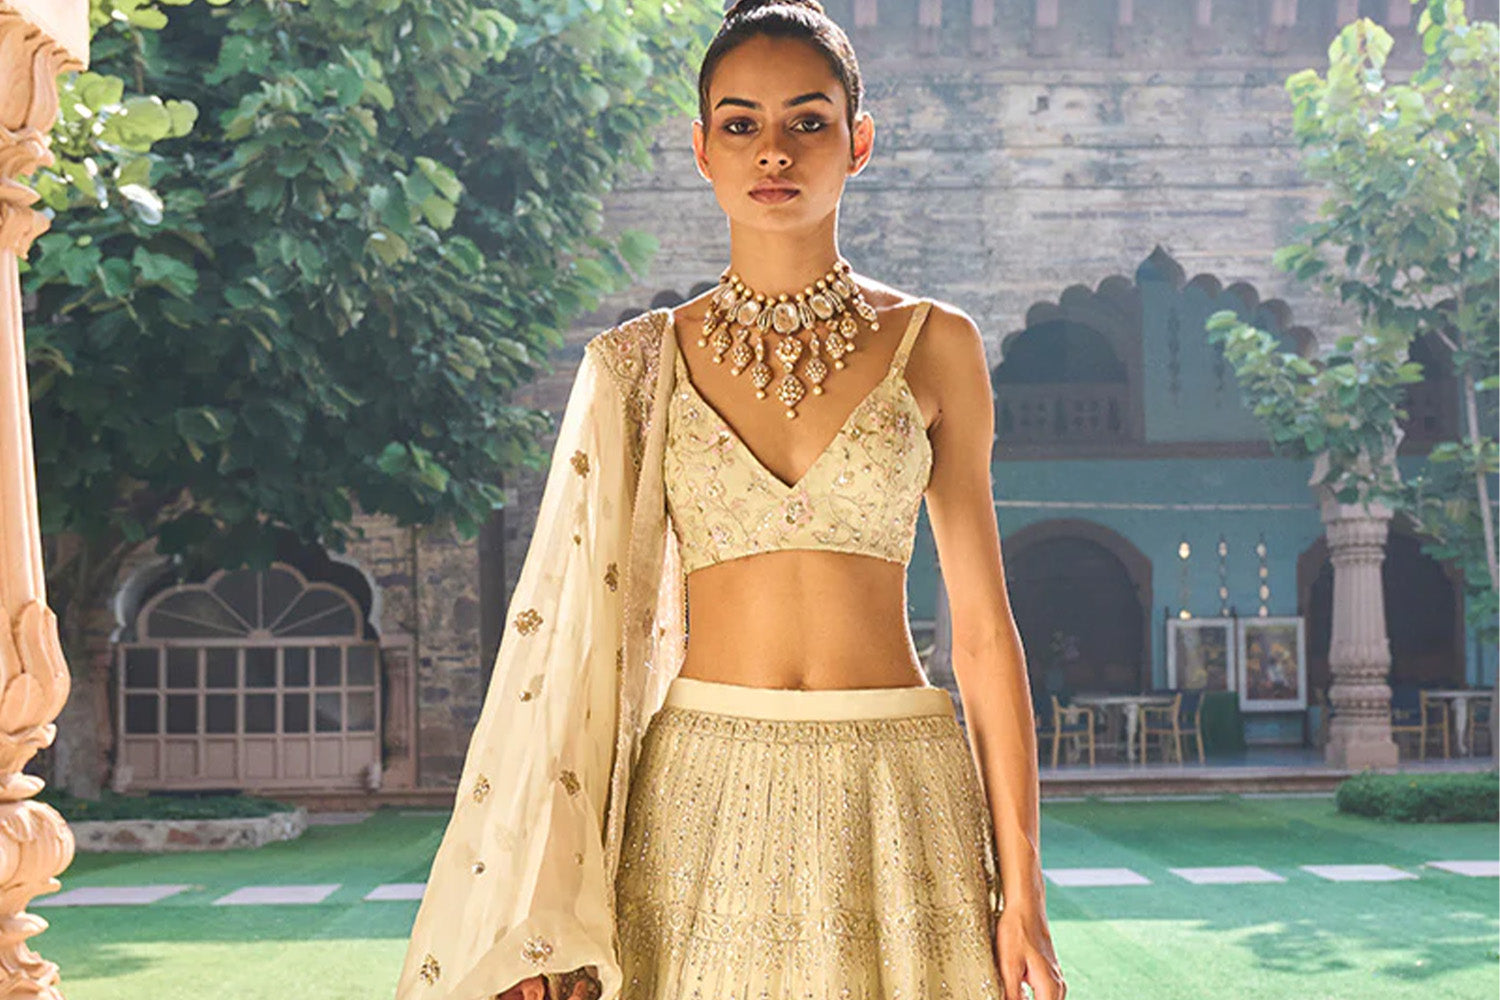 Planning to wear a lehenga for a wedding? Follow these simple